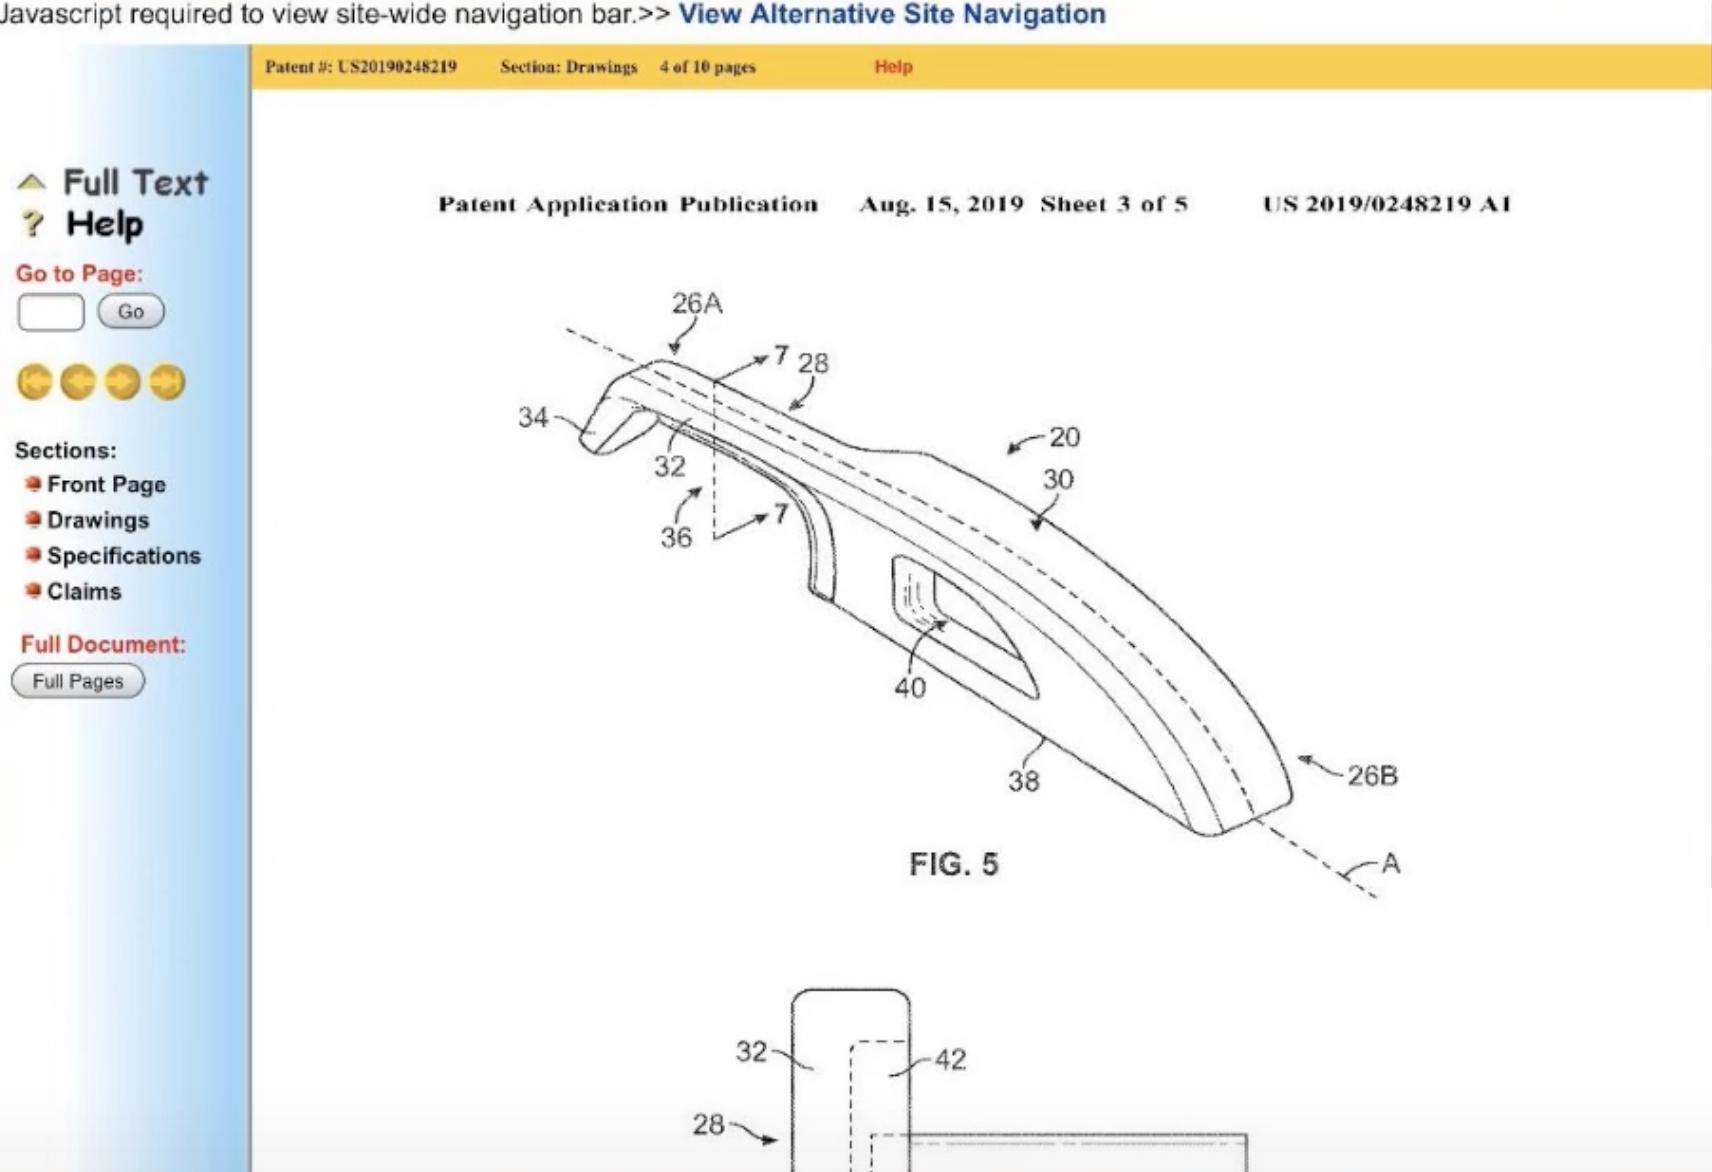 Ford Bronco Patents reveal floor drain and possible dual-uses for hood tie down Screen Shot 2020-07-12 at 8.52.40 PM